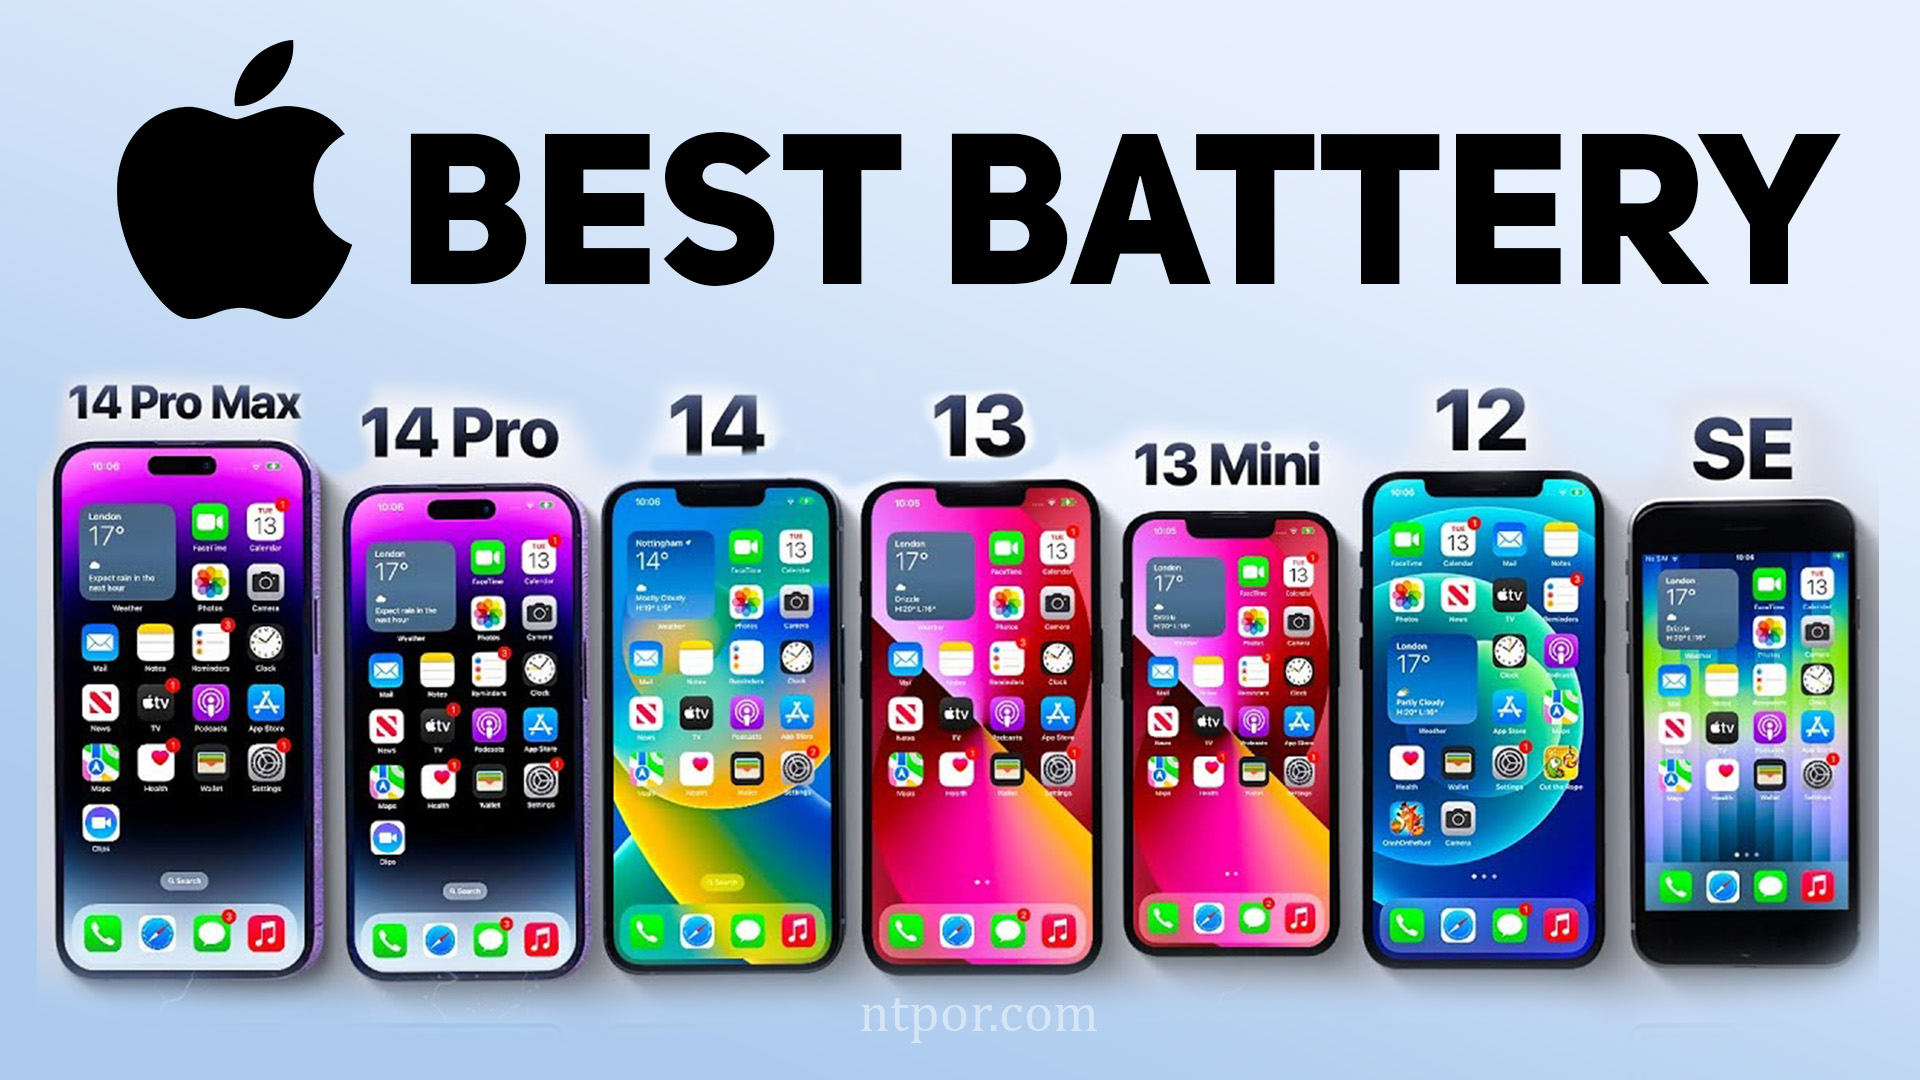 Which iPhone has the best battery life